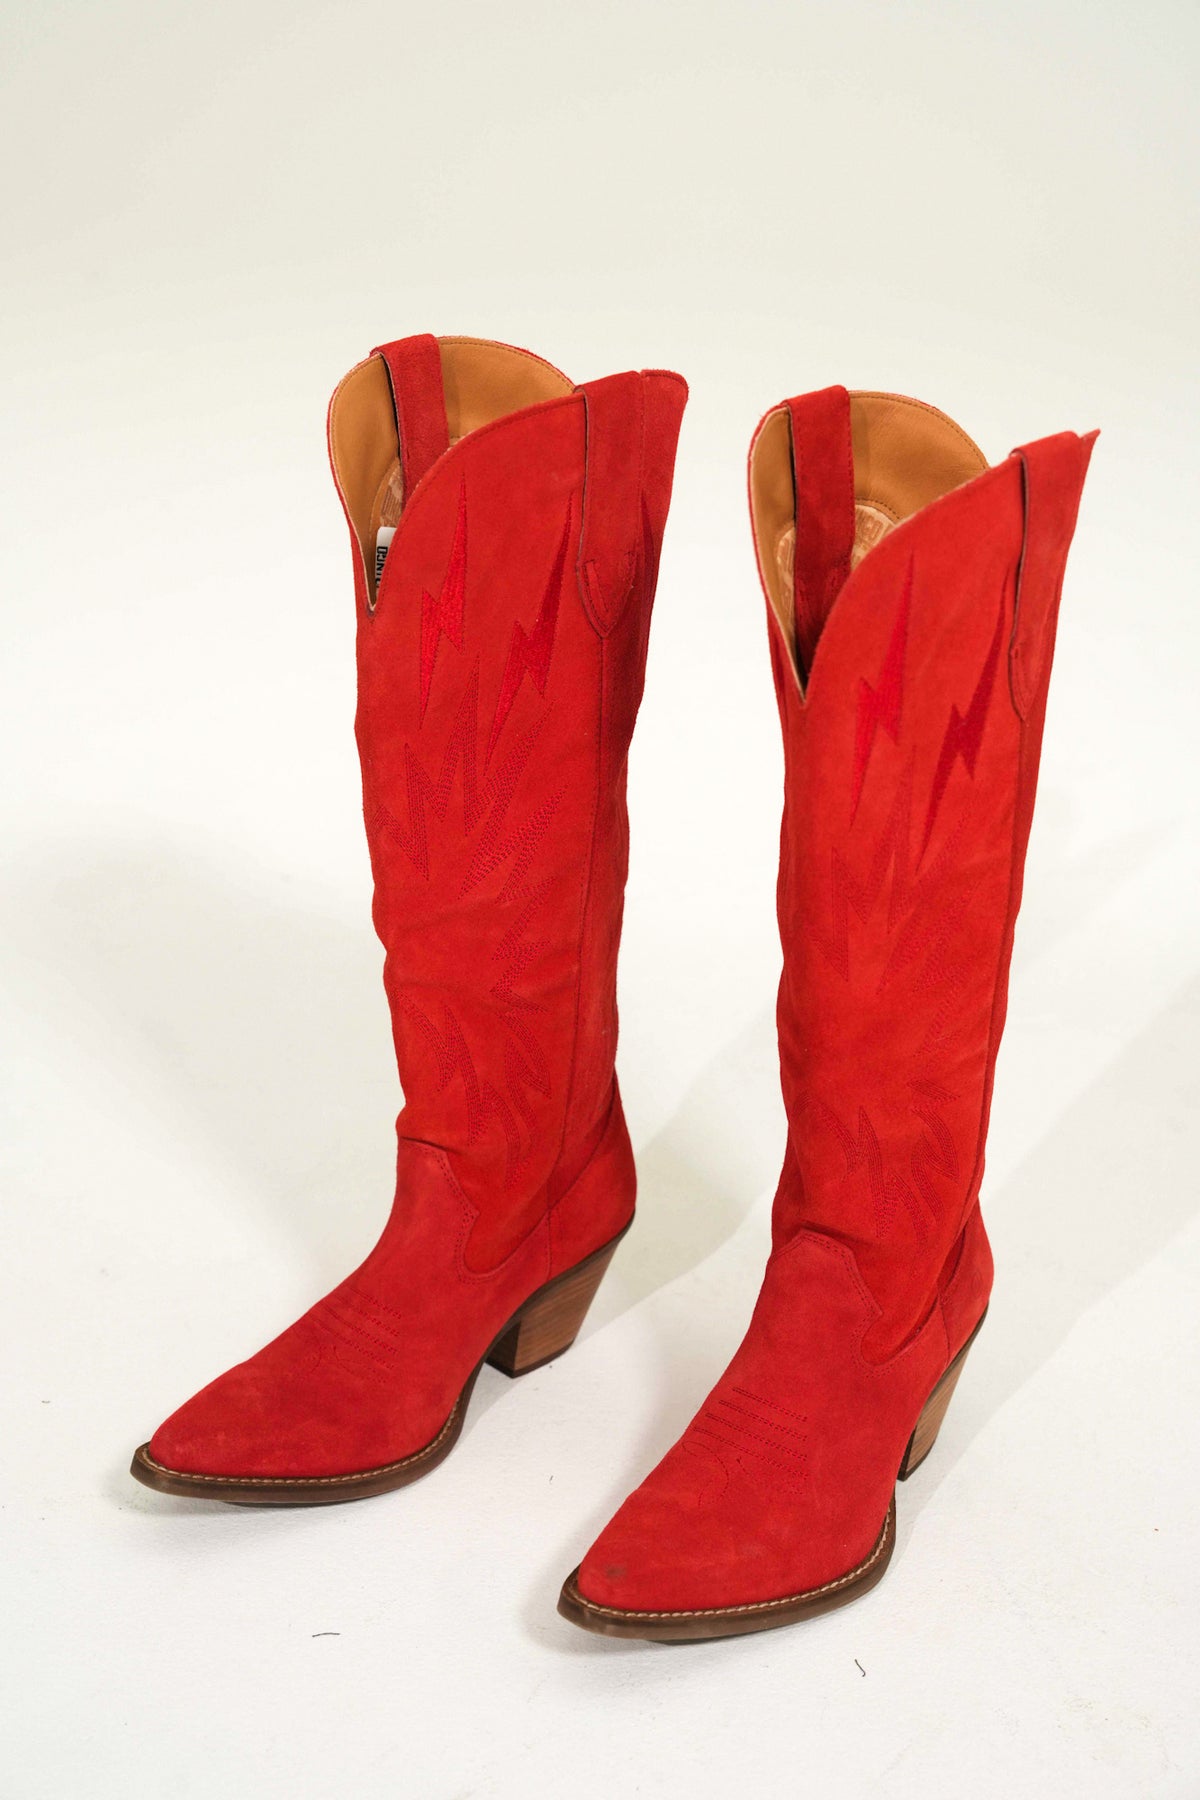 Thunder Road Leather Boot in Red